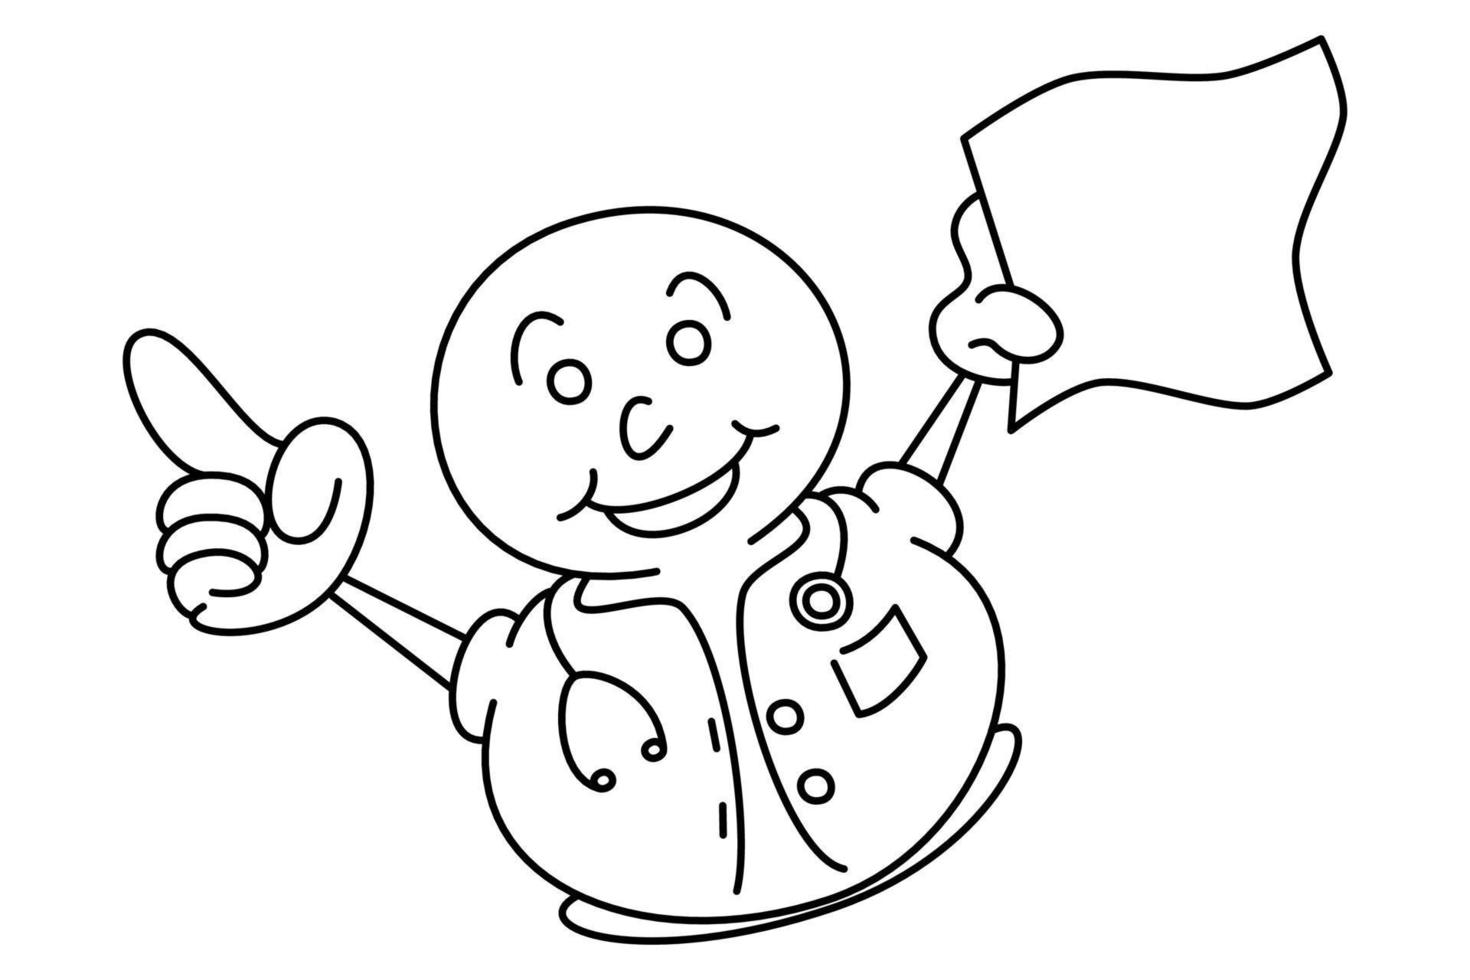 Line drawing doctor pointing finger with sign in hand vector